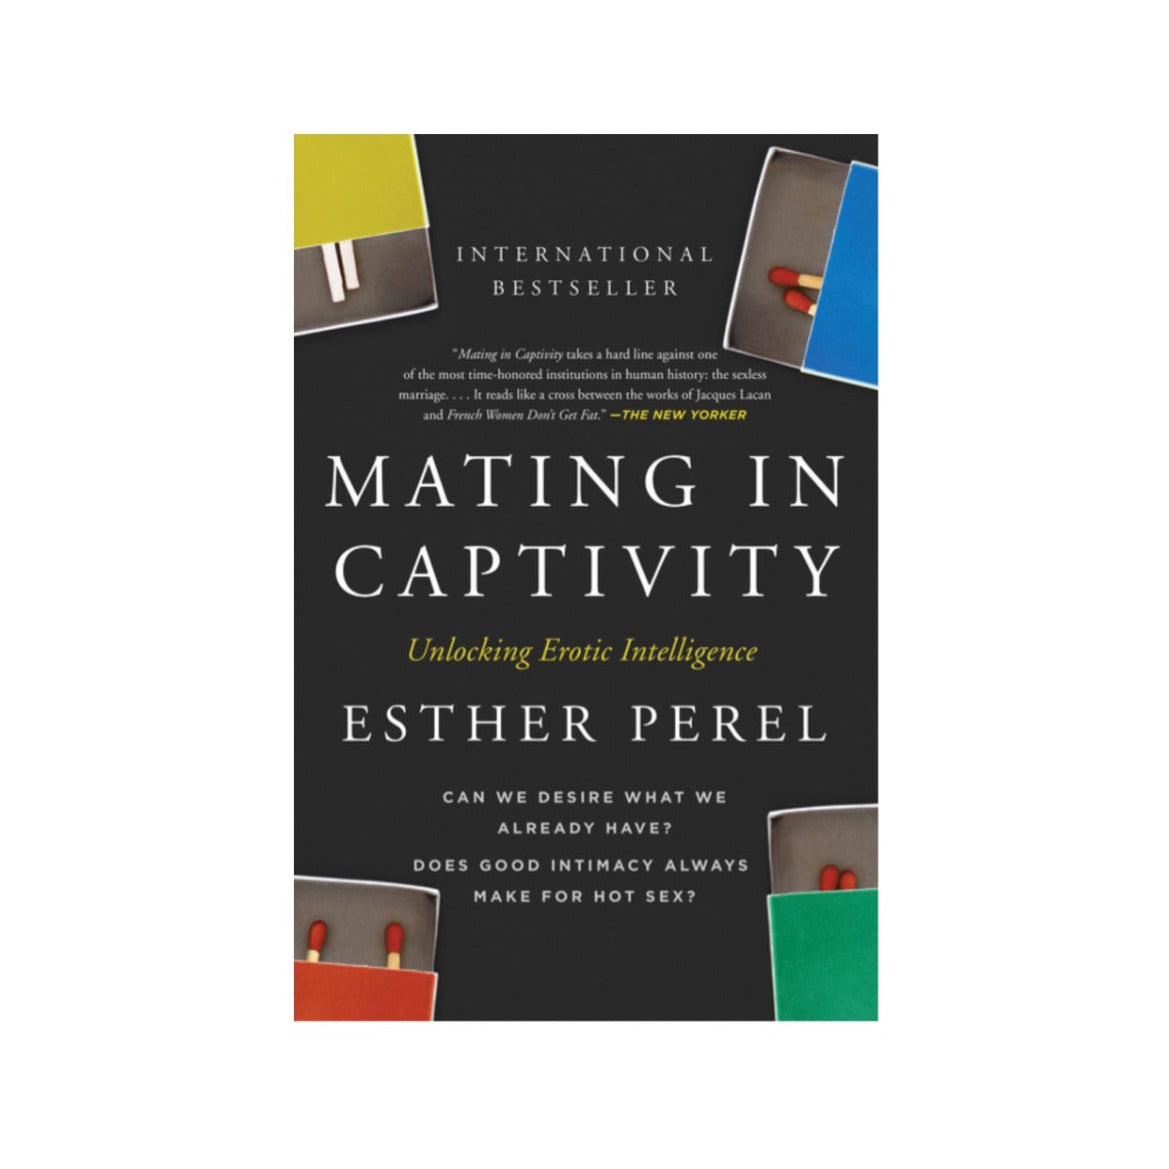 Mating In Captivity by Esther Perel